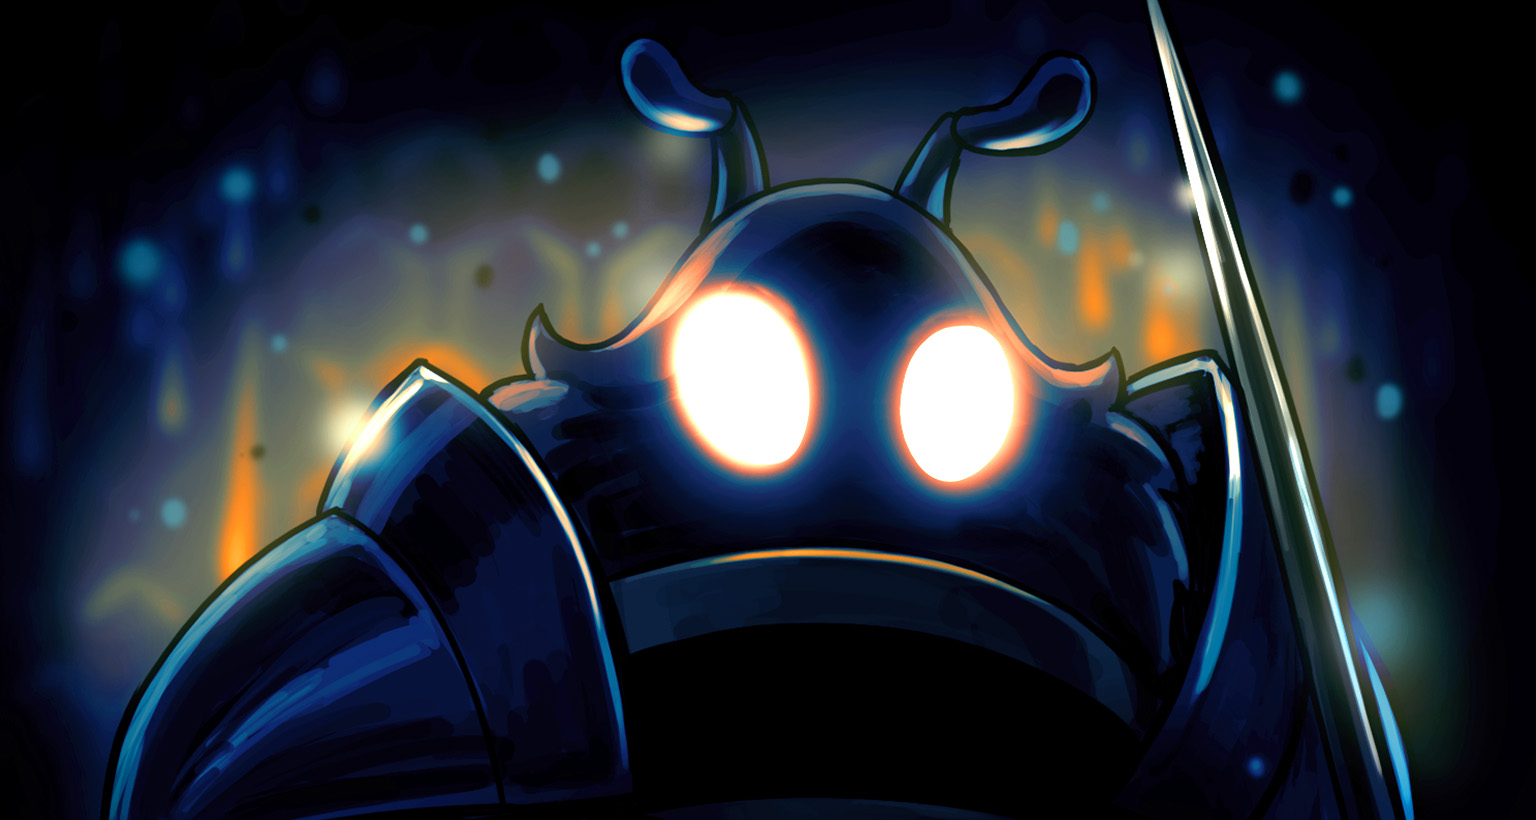 Hollow Knight: Lifeblood Update Now Available in Steam Public Beta